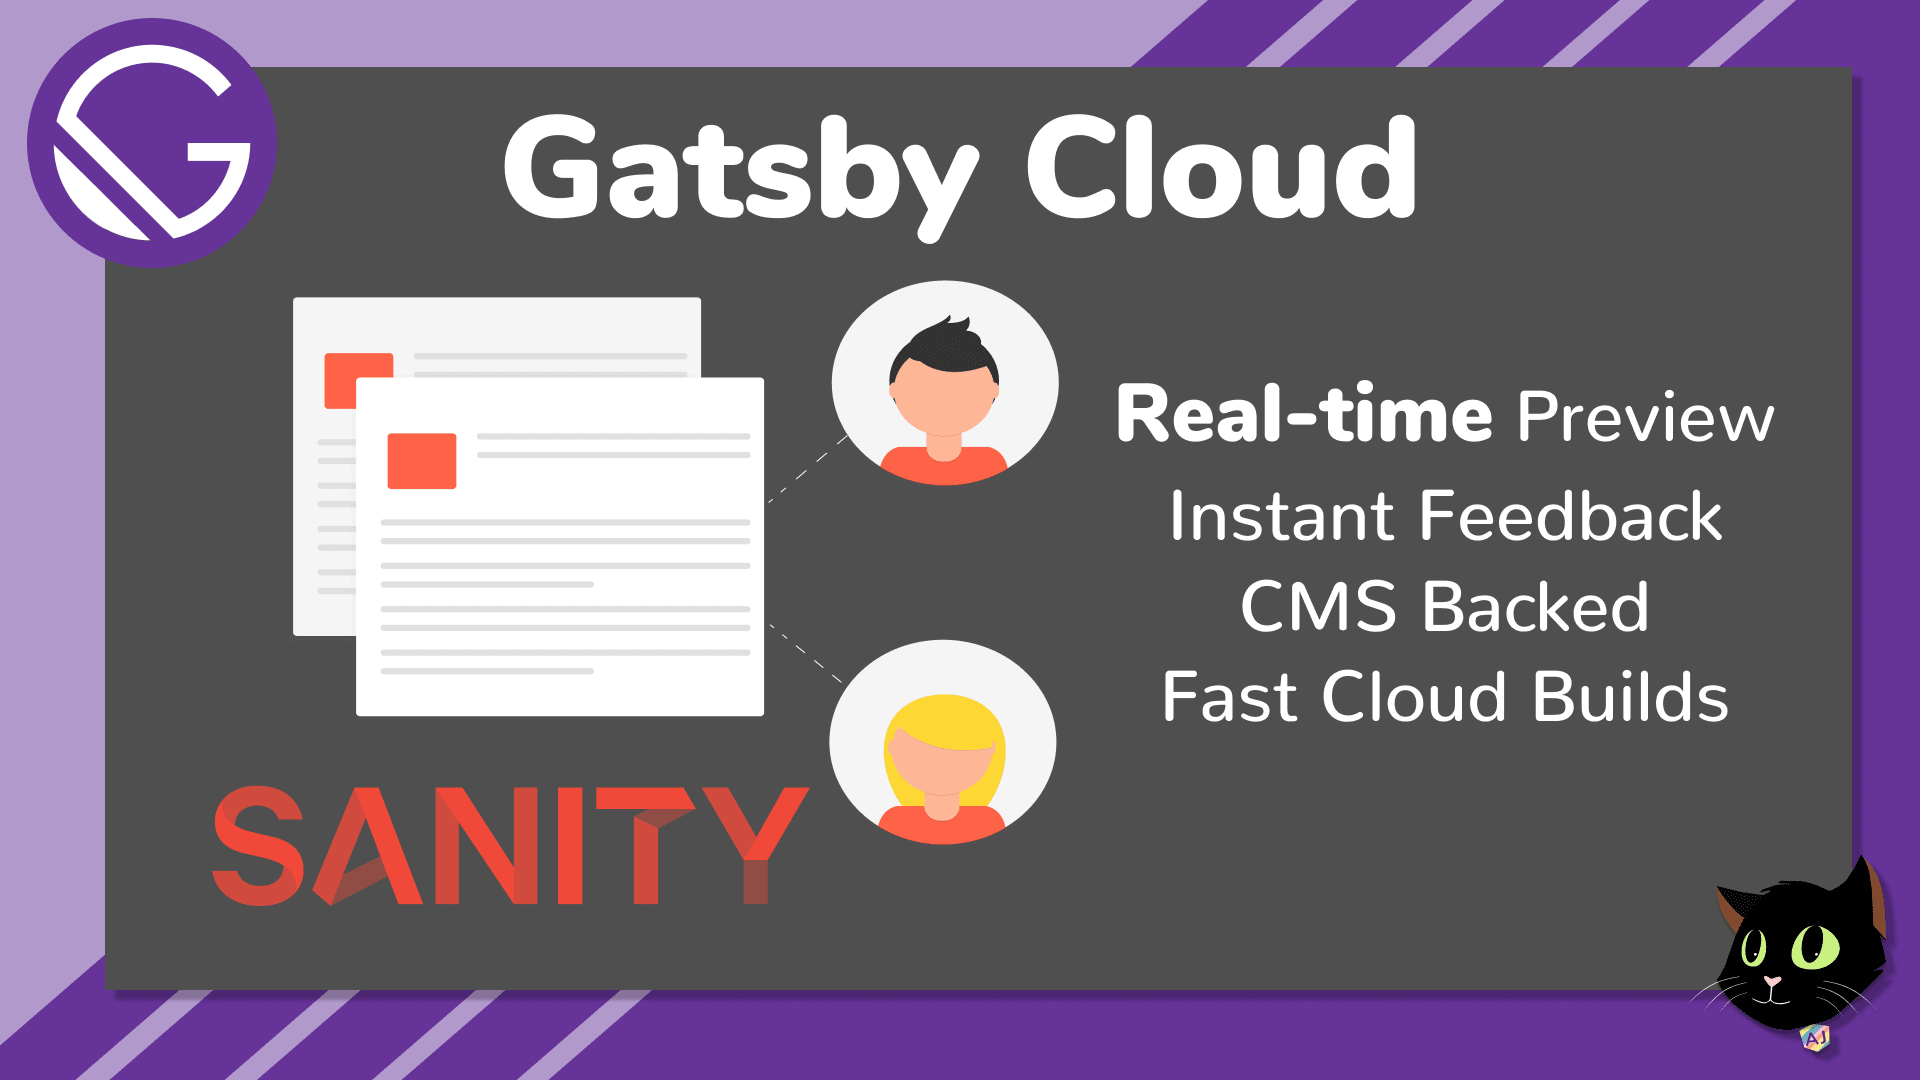 Gatsby Cloud with Sanity CMS